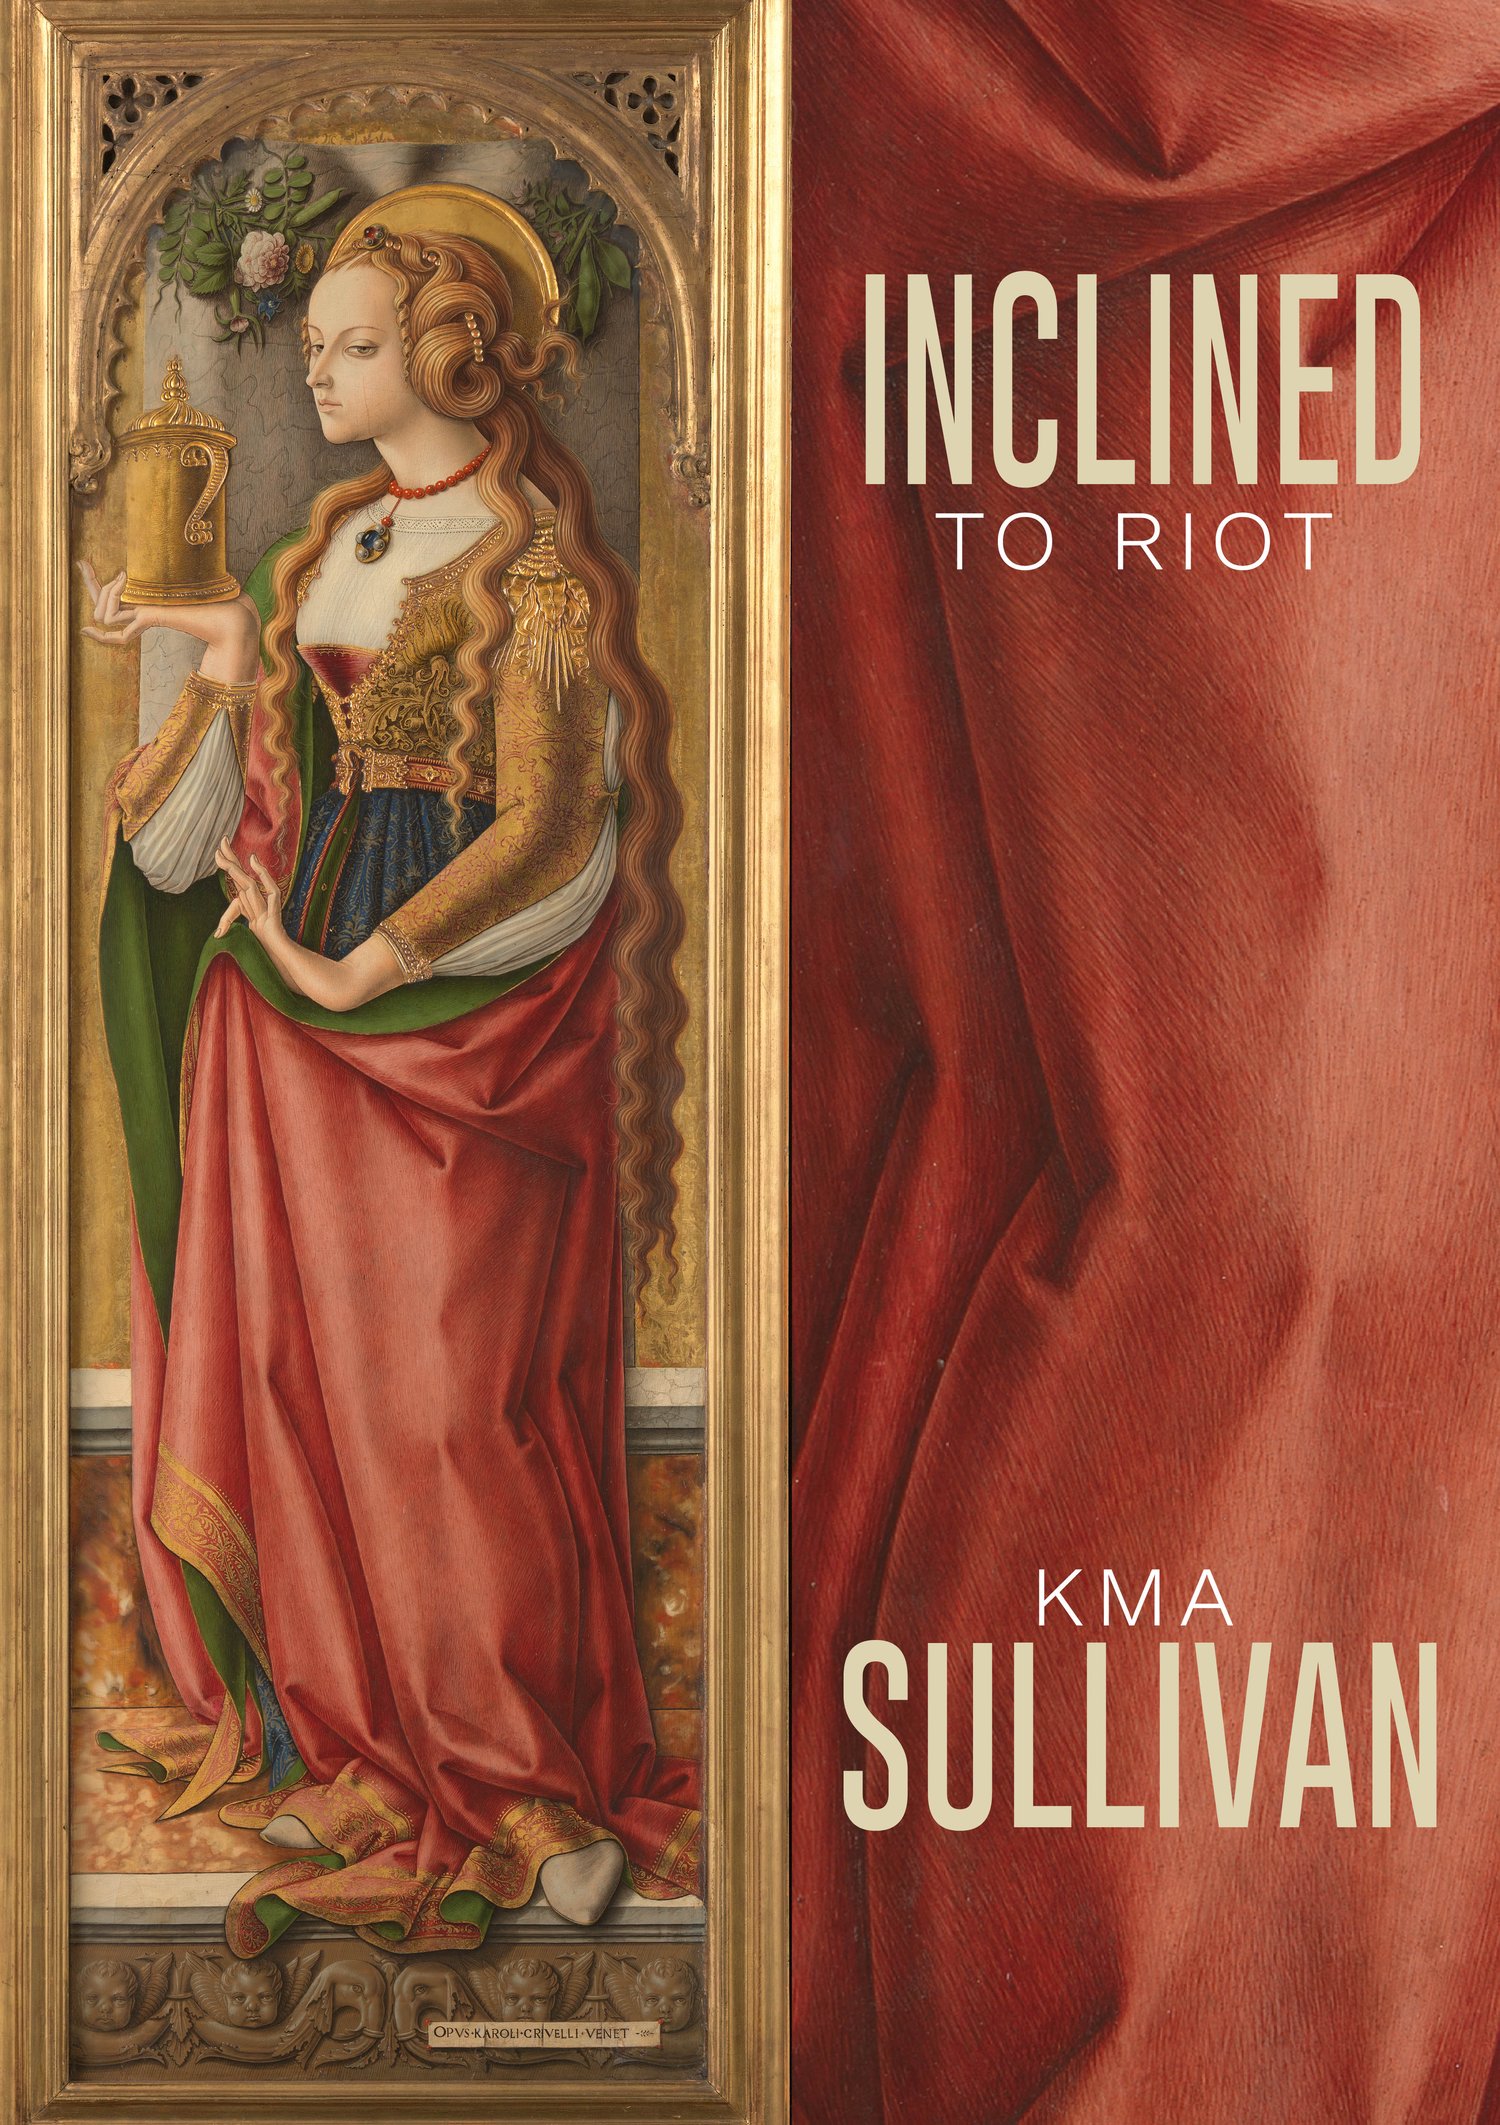 Image of Inclined to Riot by KMA Sullivan